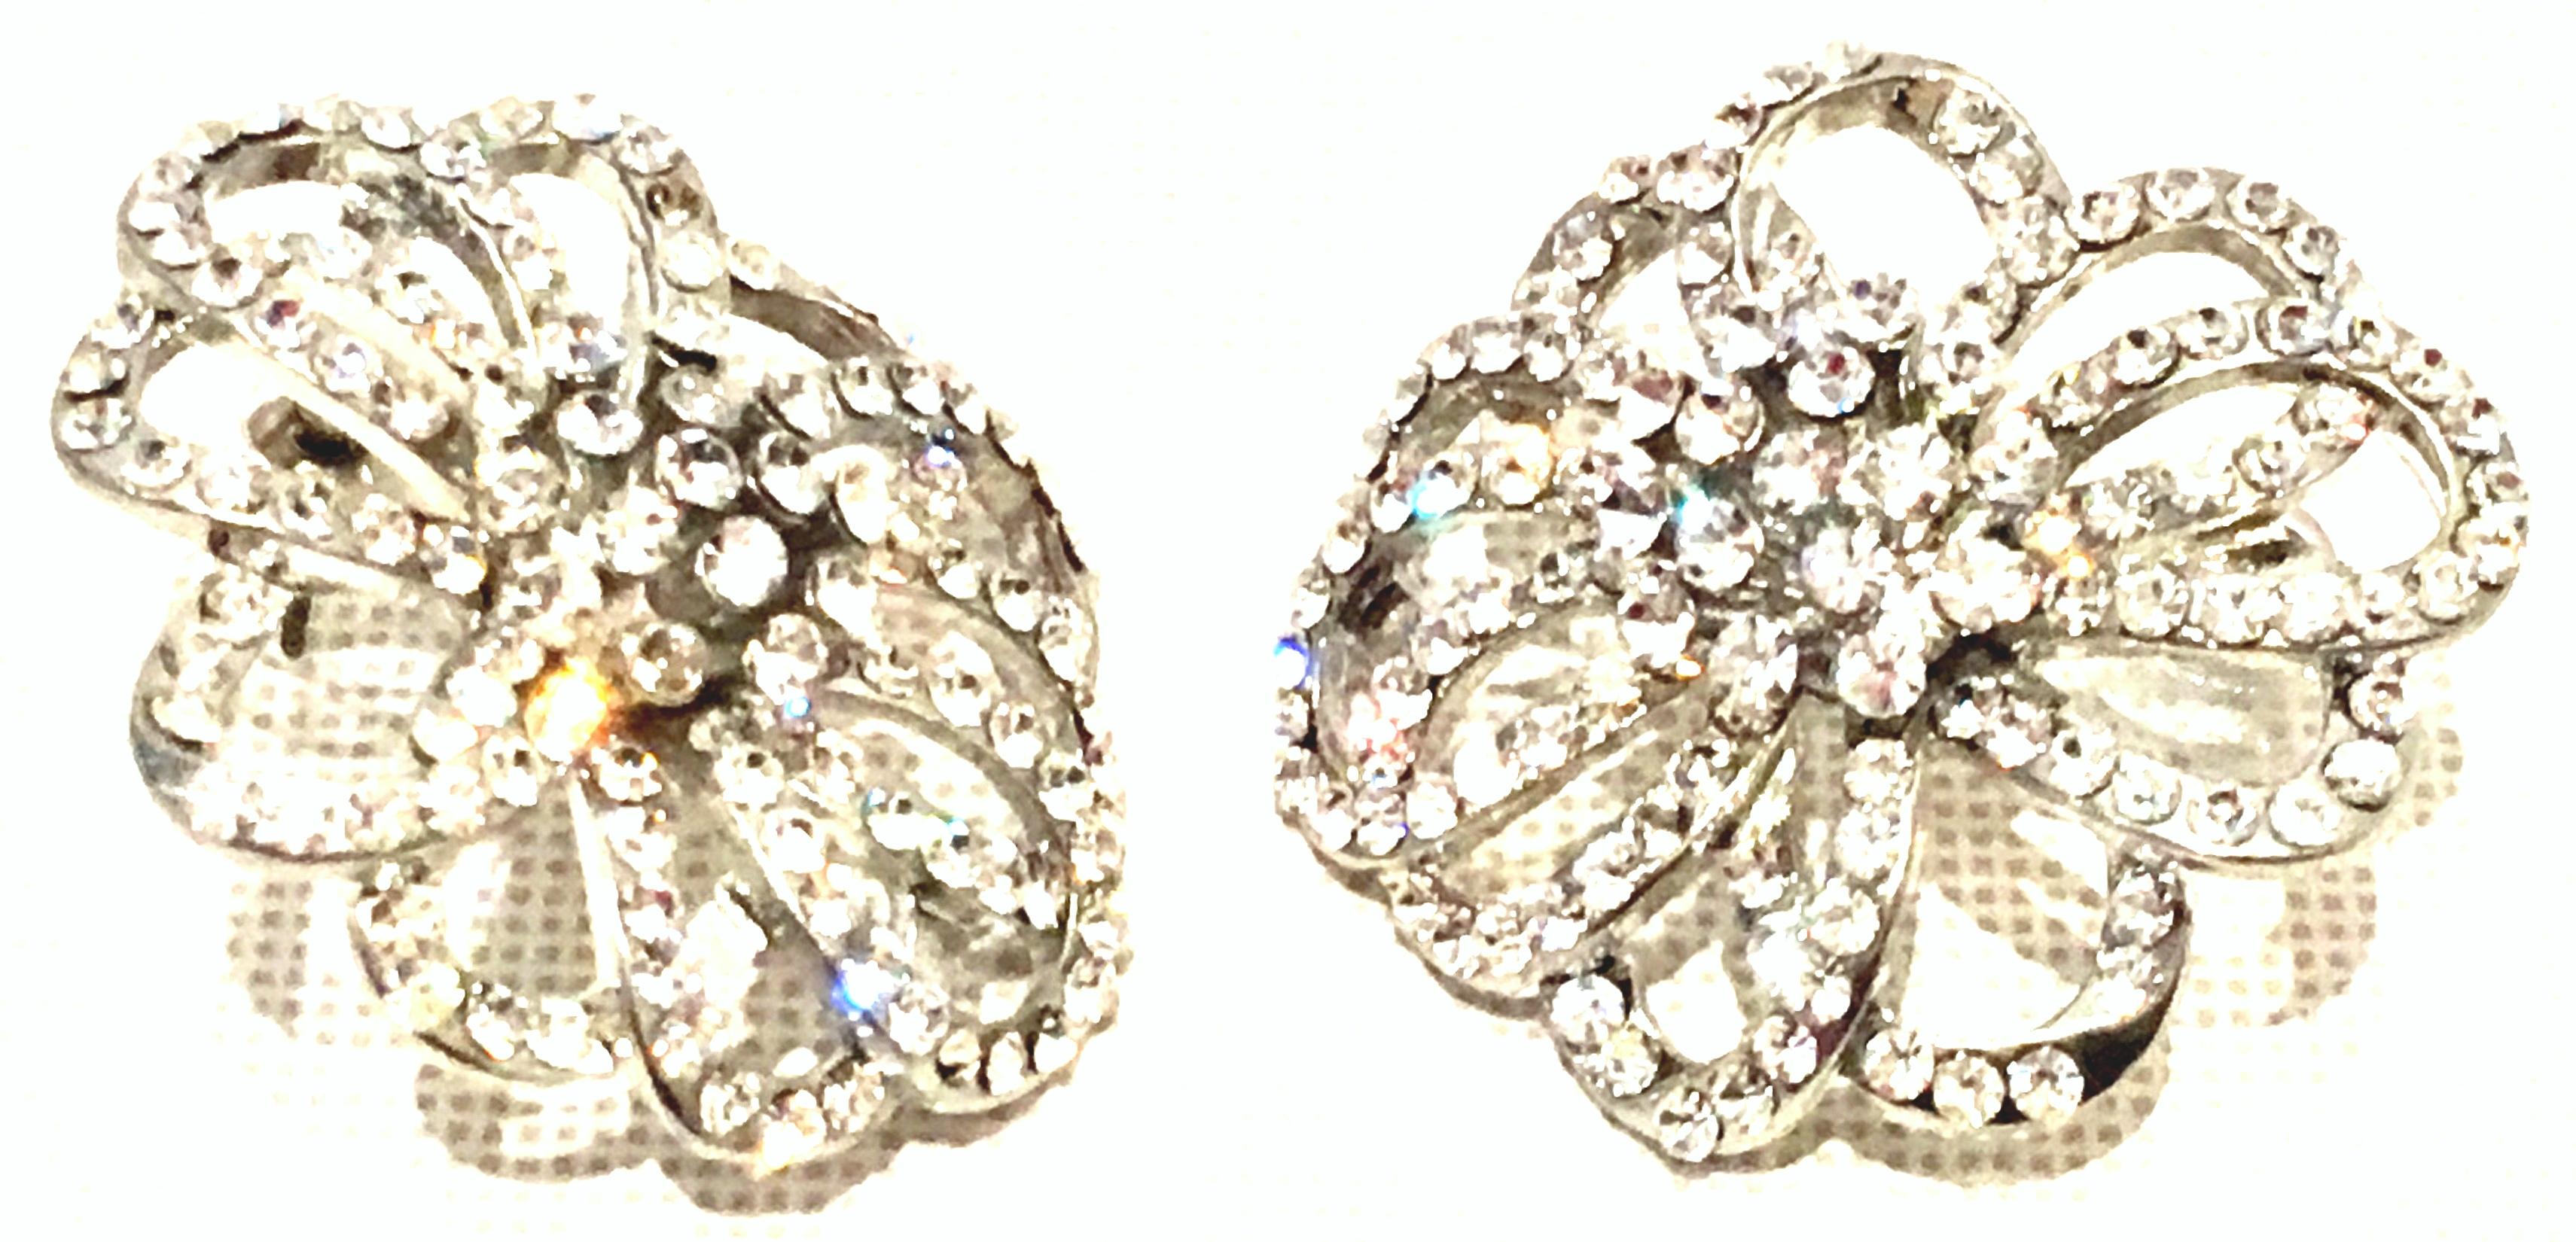 20th Century Silver & Austrian Crystal Abstract Dimensional Floral Earrings By, Swarovski. These pierced style earrings feature brilliant cut and faceted pave set stones with a silver rhodium plate base metal.